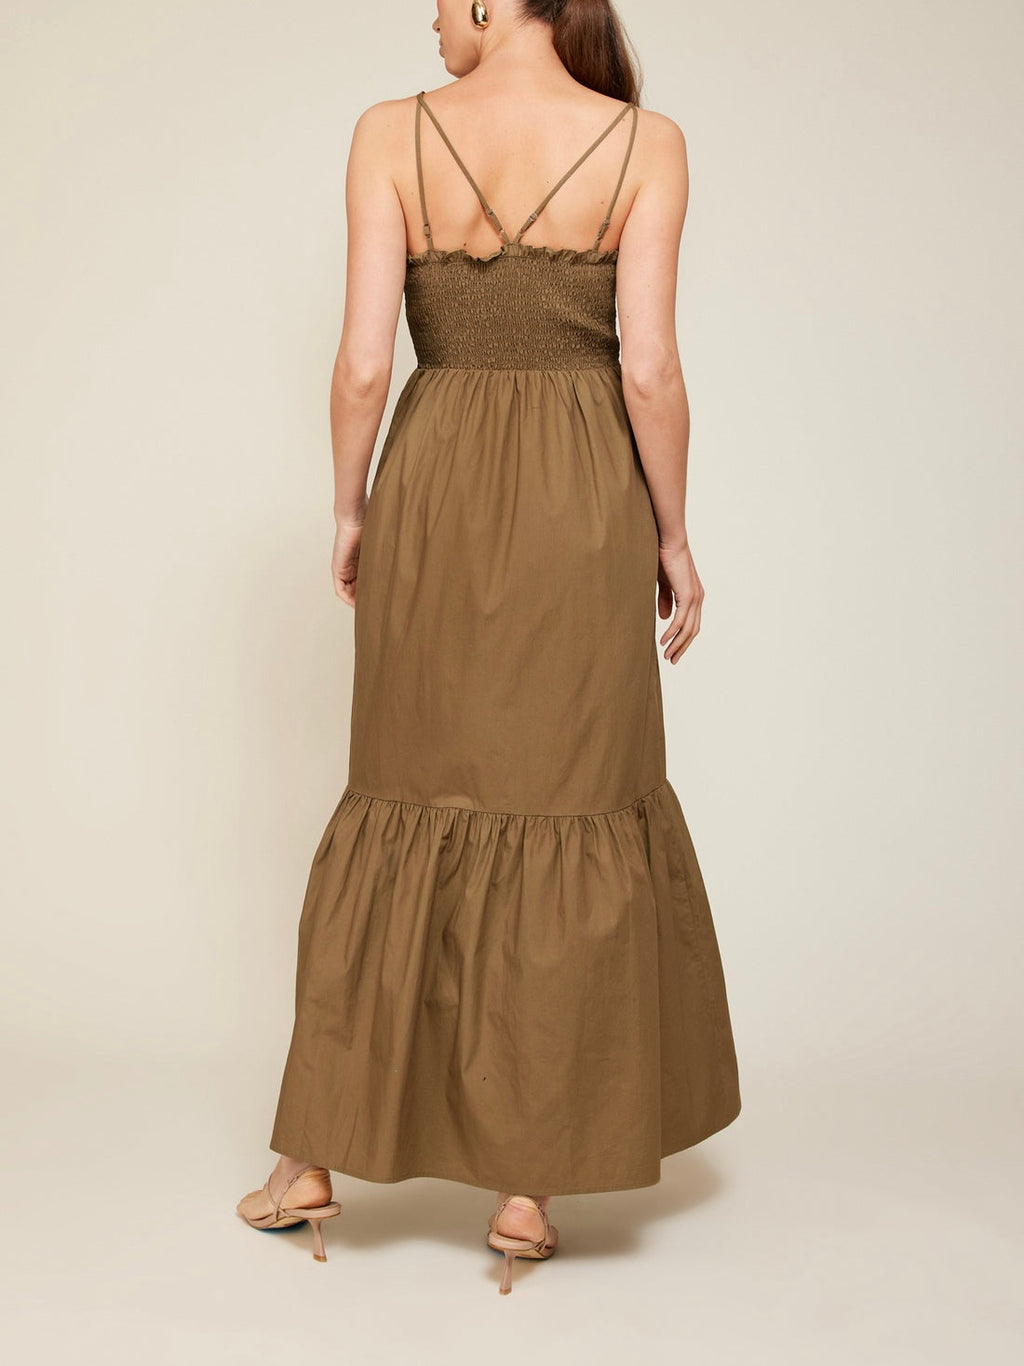 Maison Maxi Dress in Olive